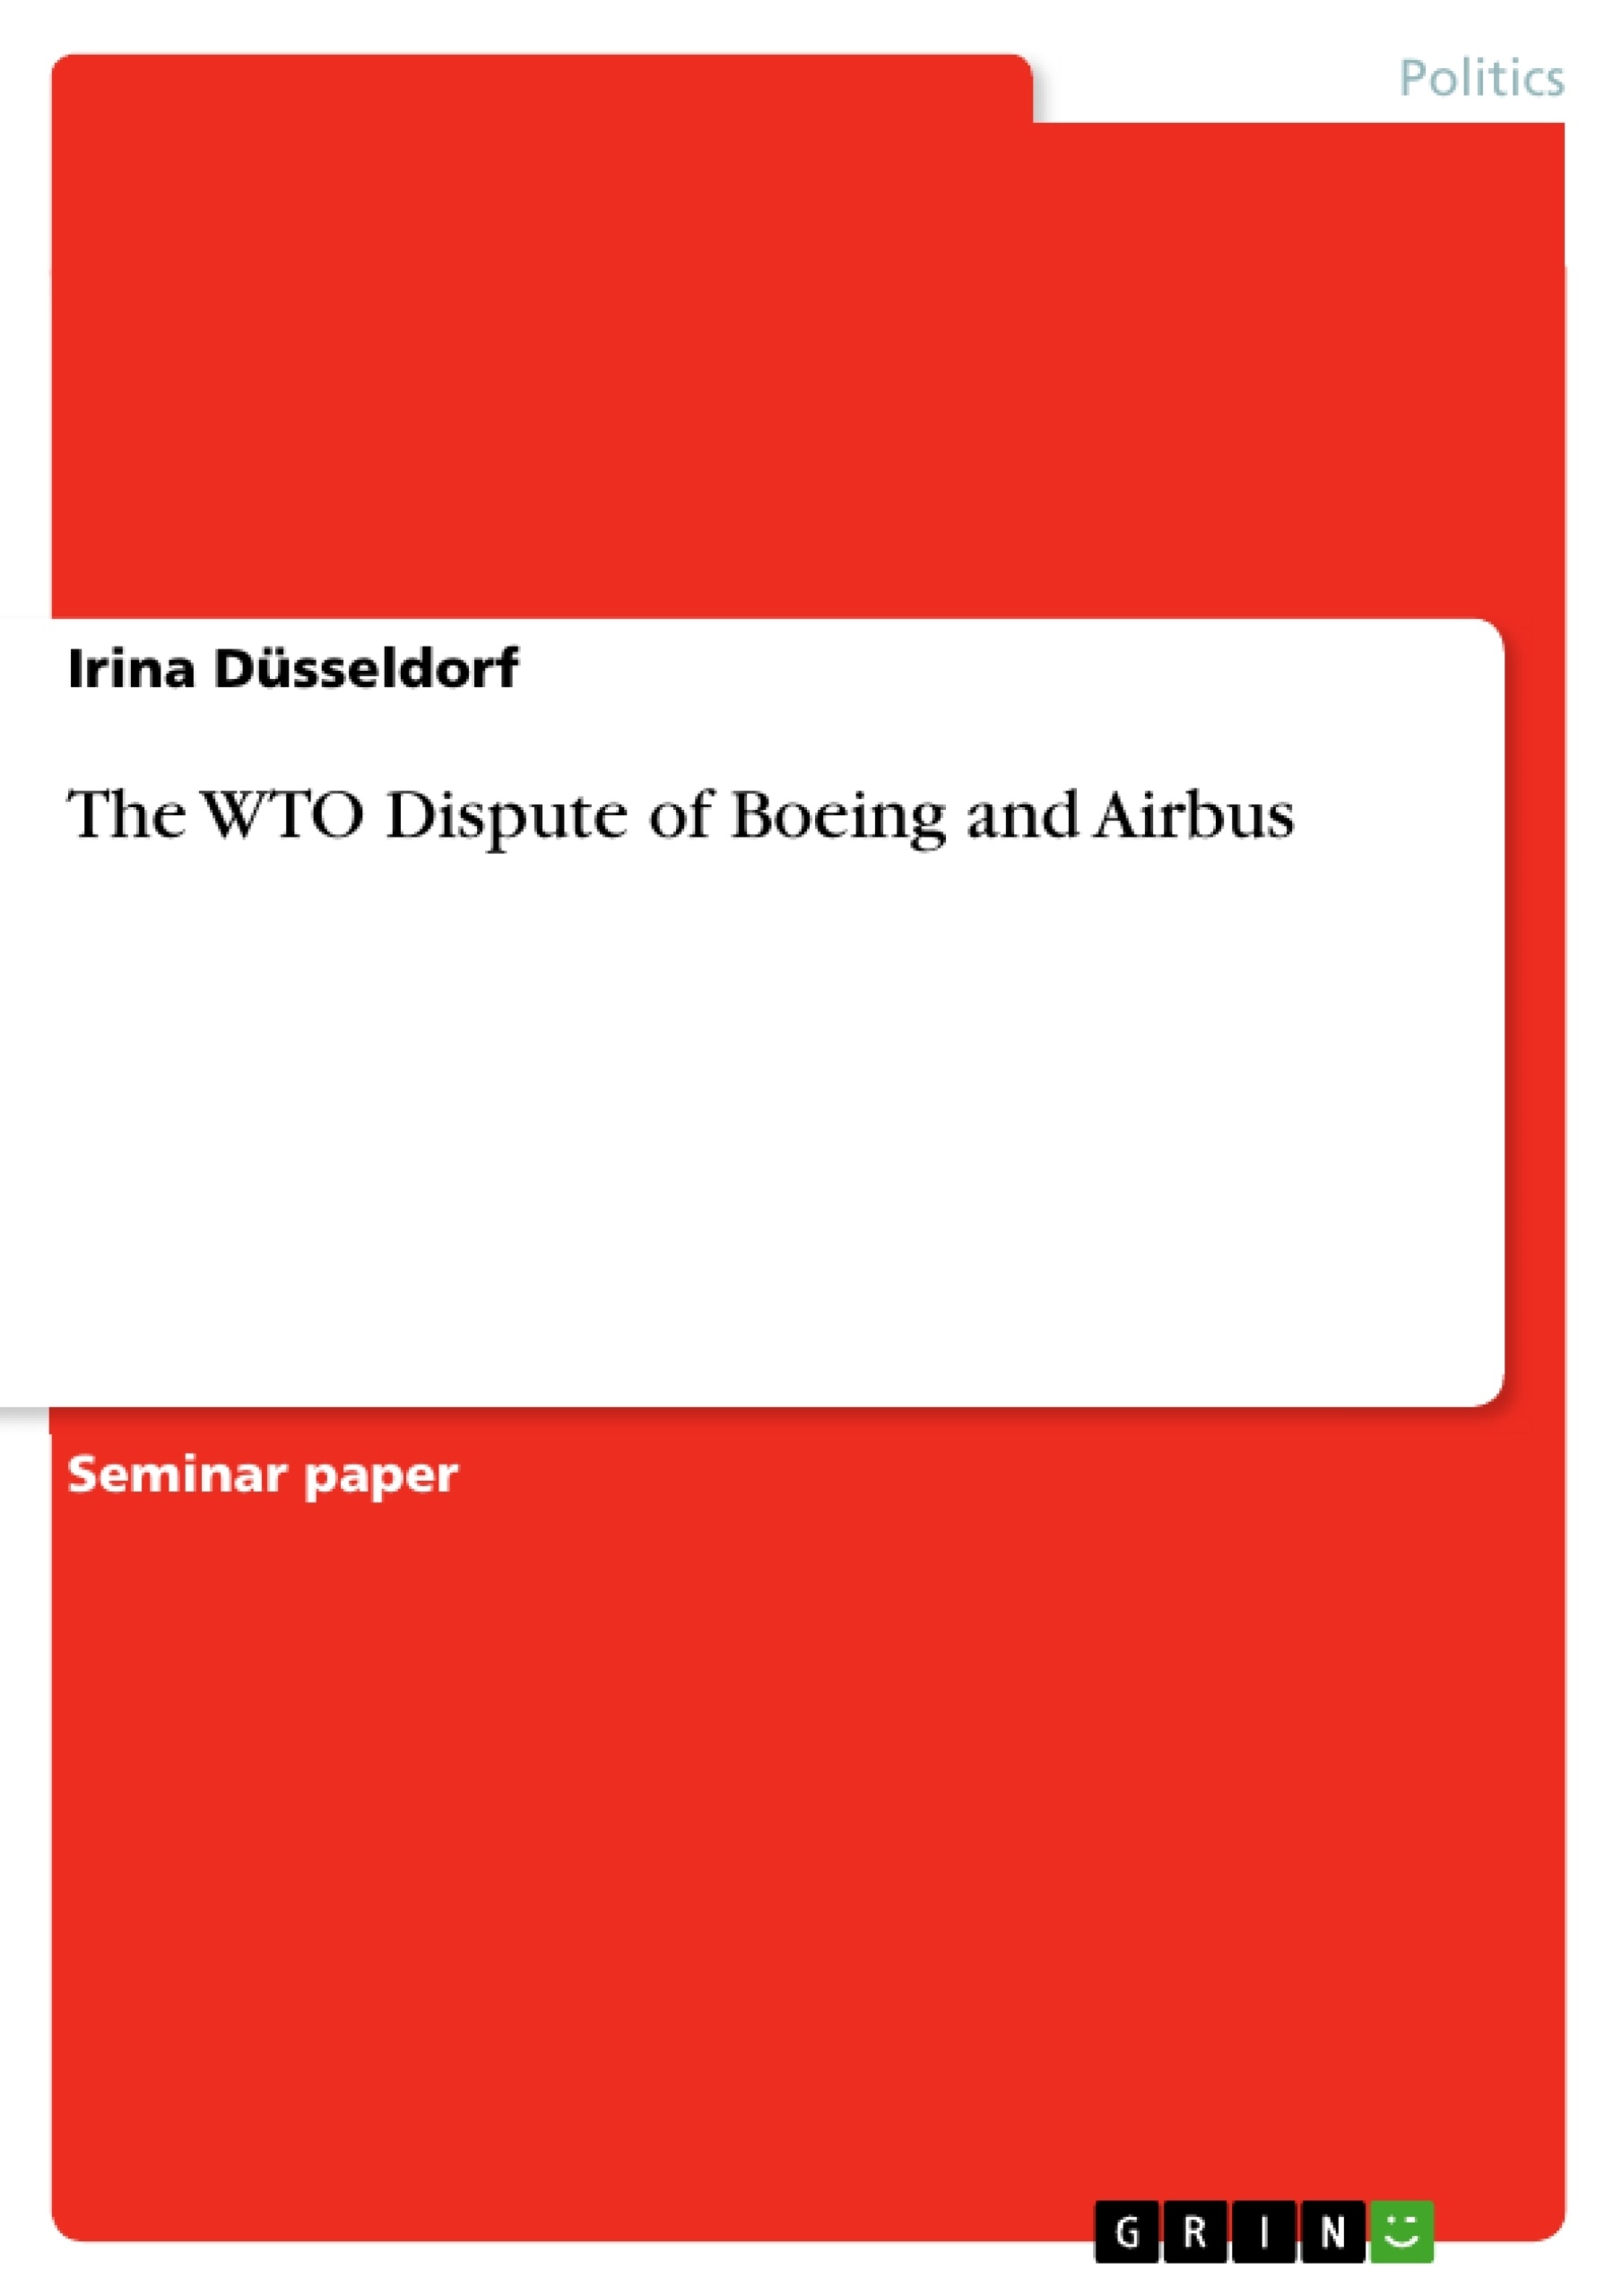 Título: The WTO Dispute of Boeing and Airbus